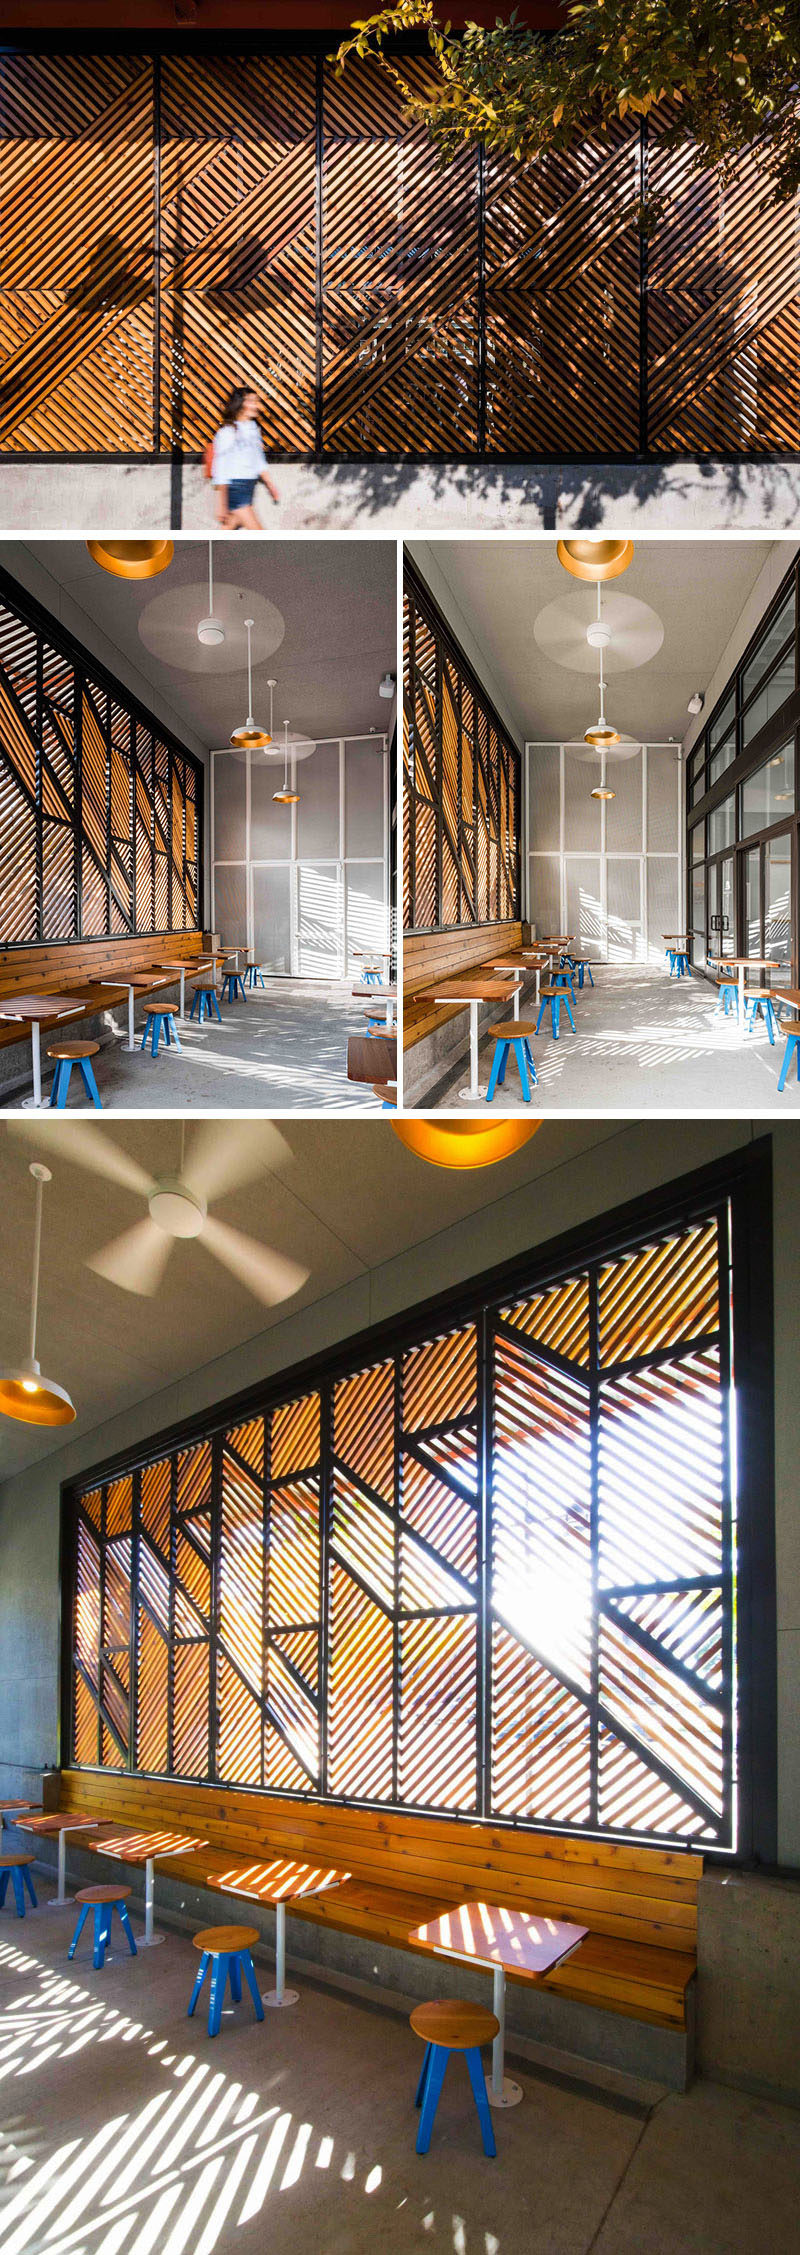 This modern coffee shop design has a houndstooth patterned cedar screen to create visual interest from the street and from within the enclosed patio. Inside the patio, sunlight is filtered through the pattern allowing for interesting shadows. The screen also shields guests from the street just outside.